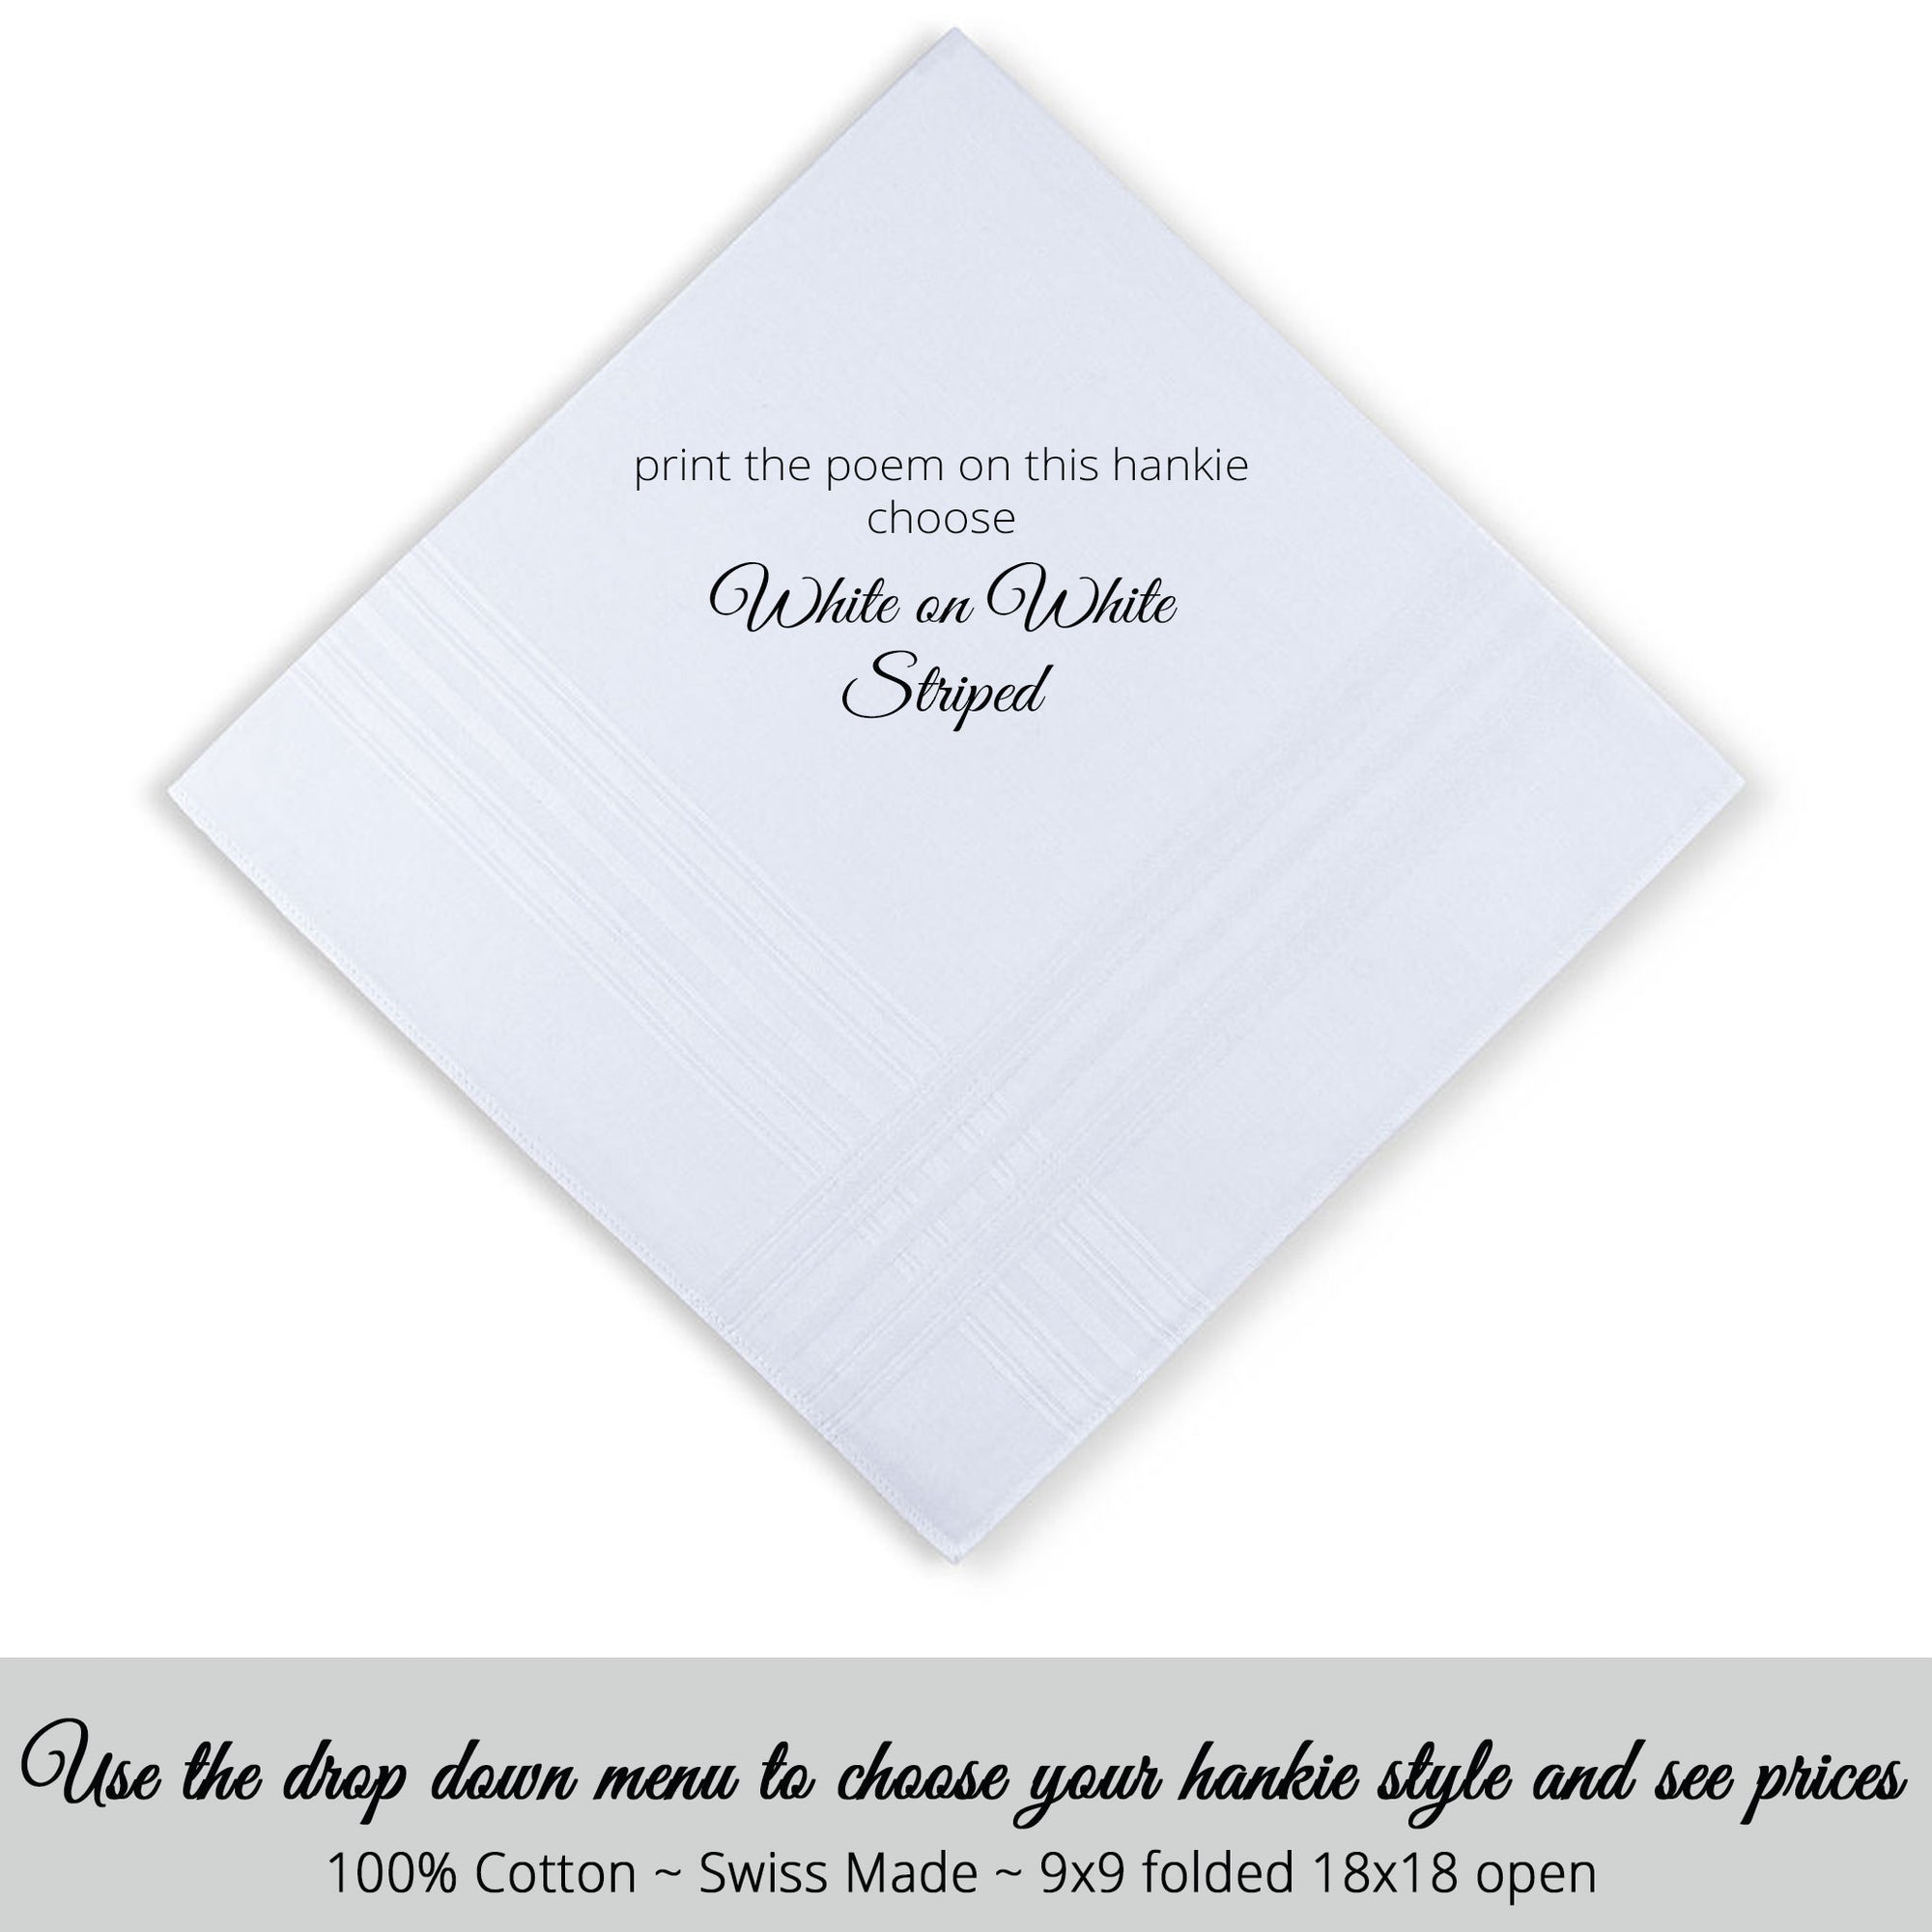   Gay Wedding Masculine Hankie style Swiss made white on white striped for the Bride poem printed hankie